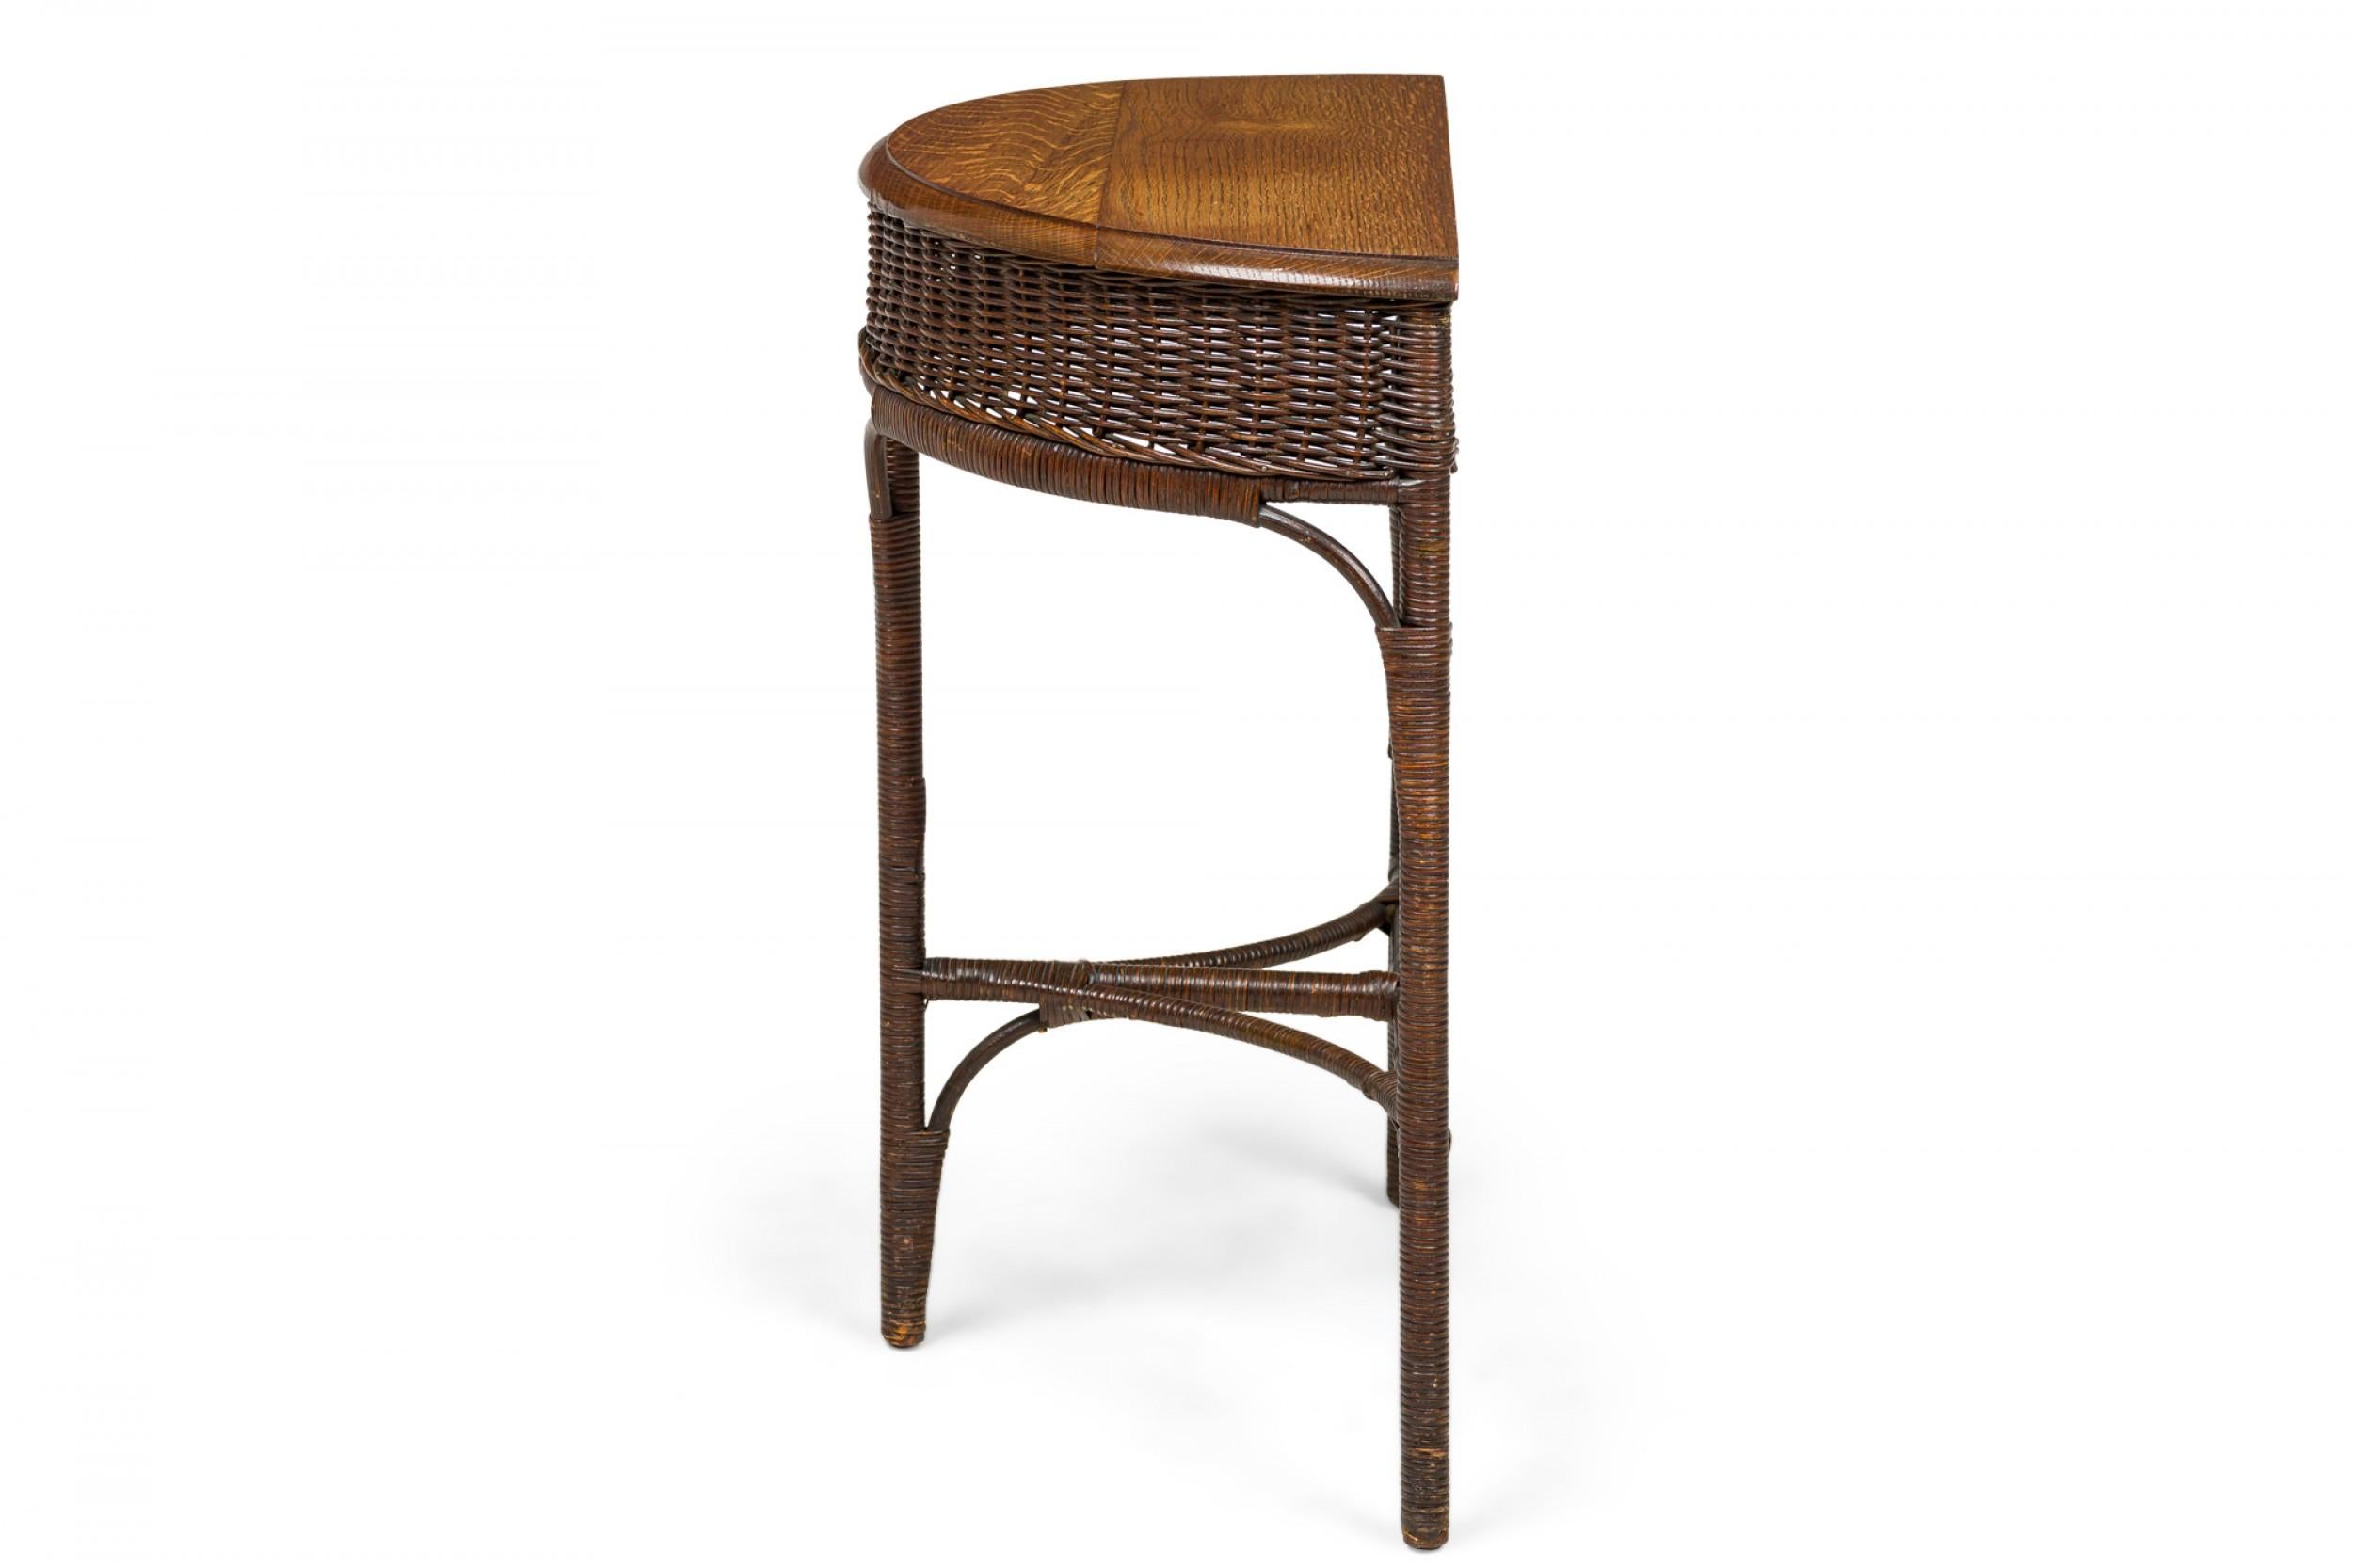 American Victorian Wicker and oak topped demilune side table with beveled top edge and wicker apron, resting on 3 wicker-wrapped legs, with curved wood supports and a T-shaped stretcher base.